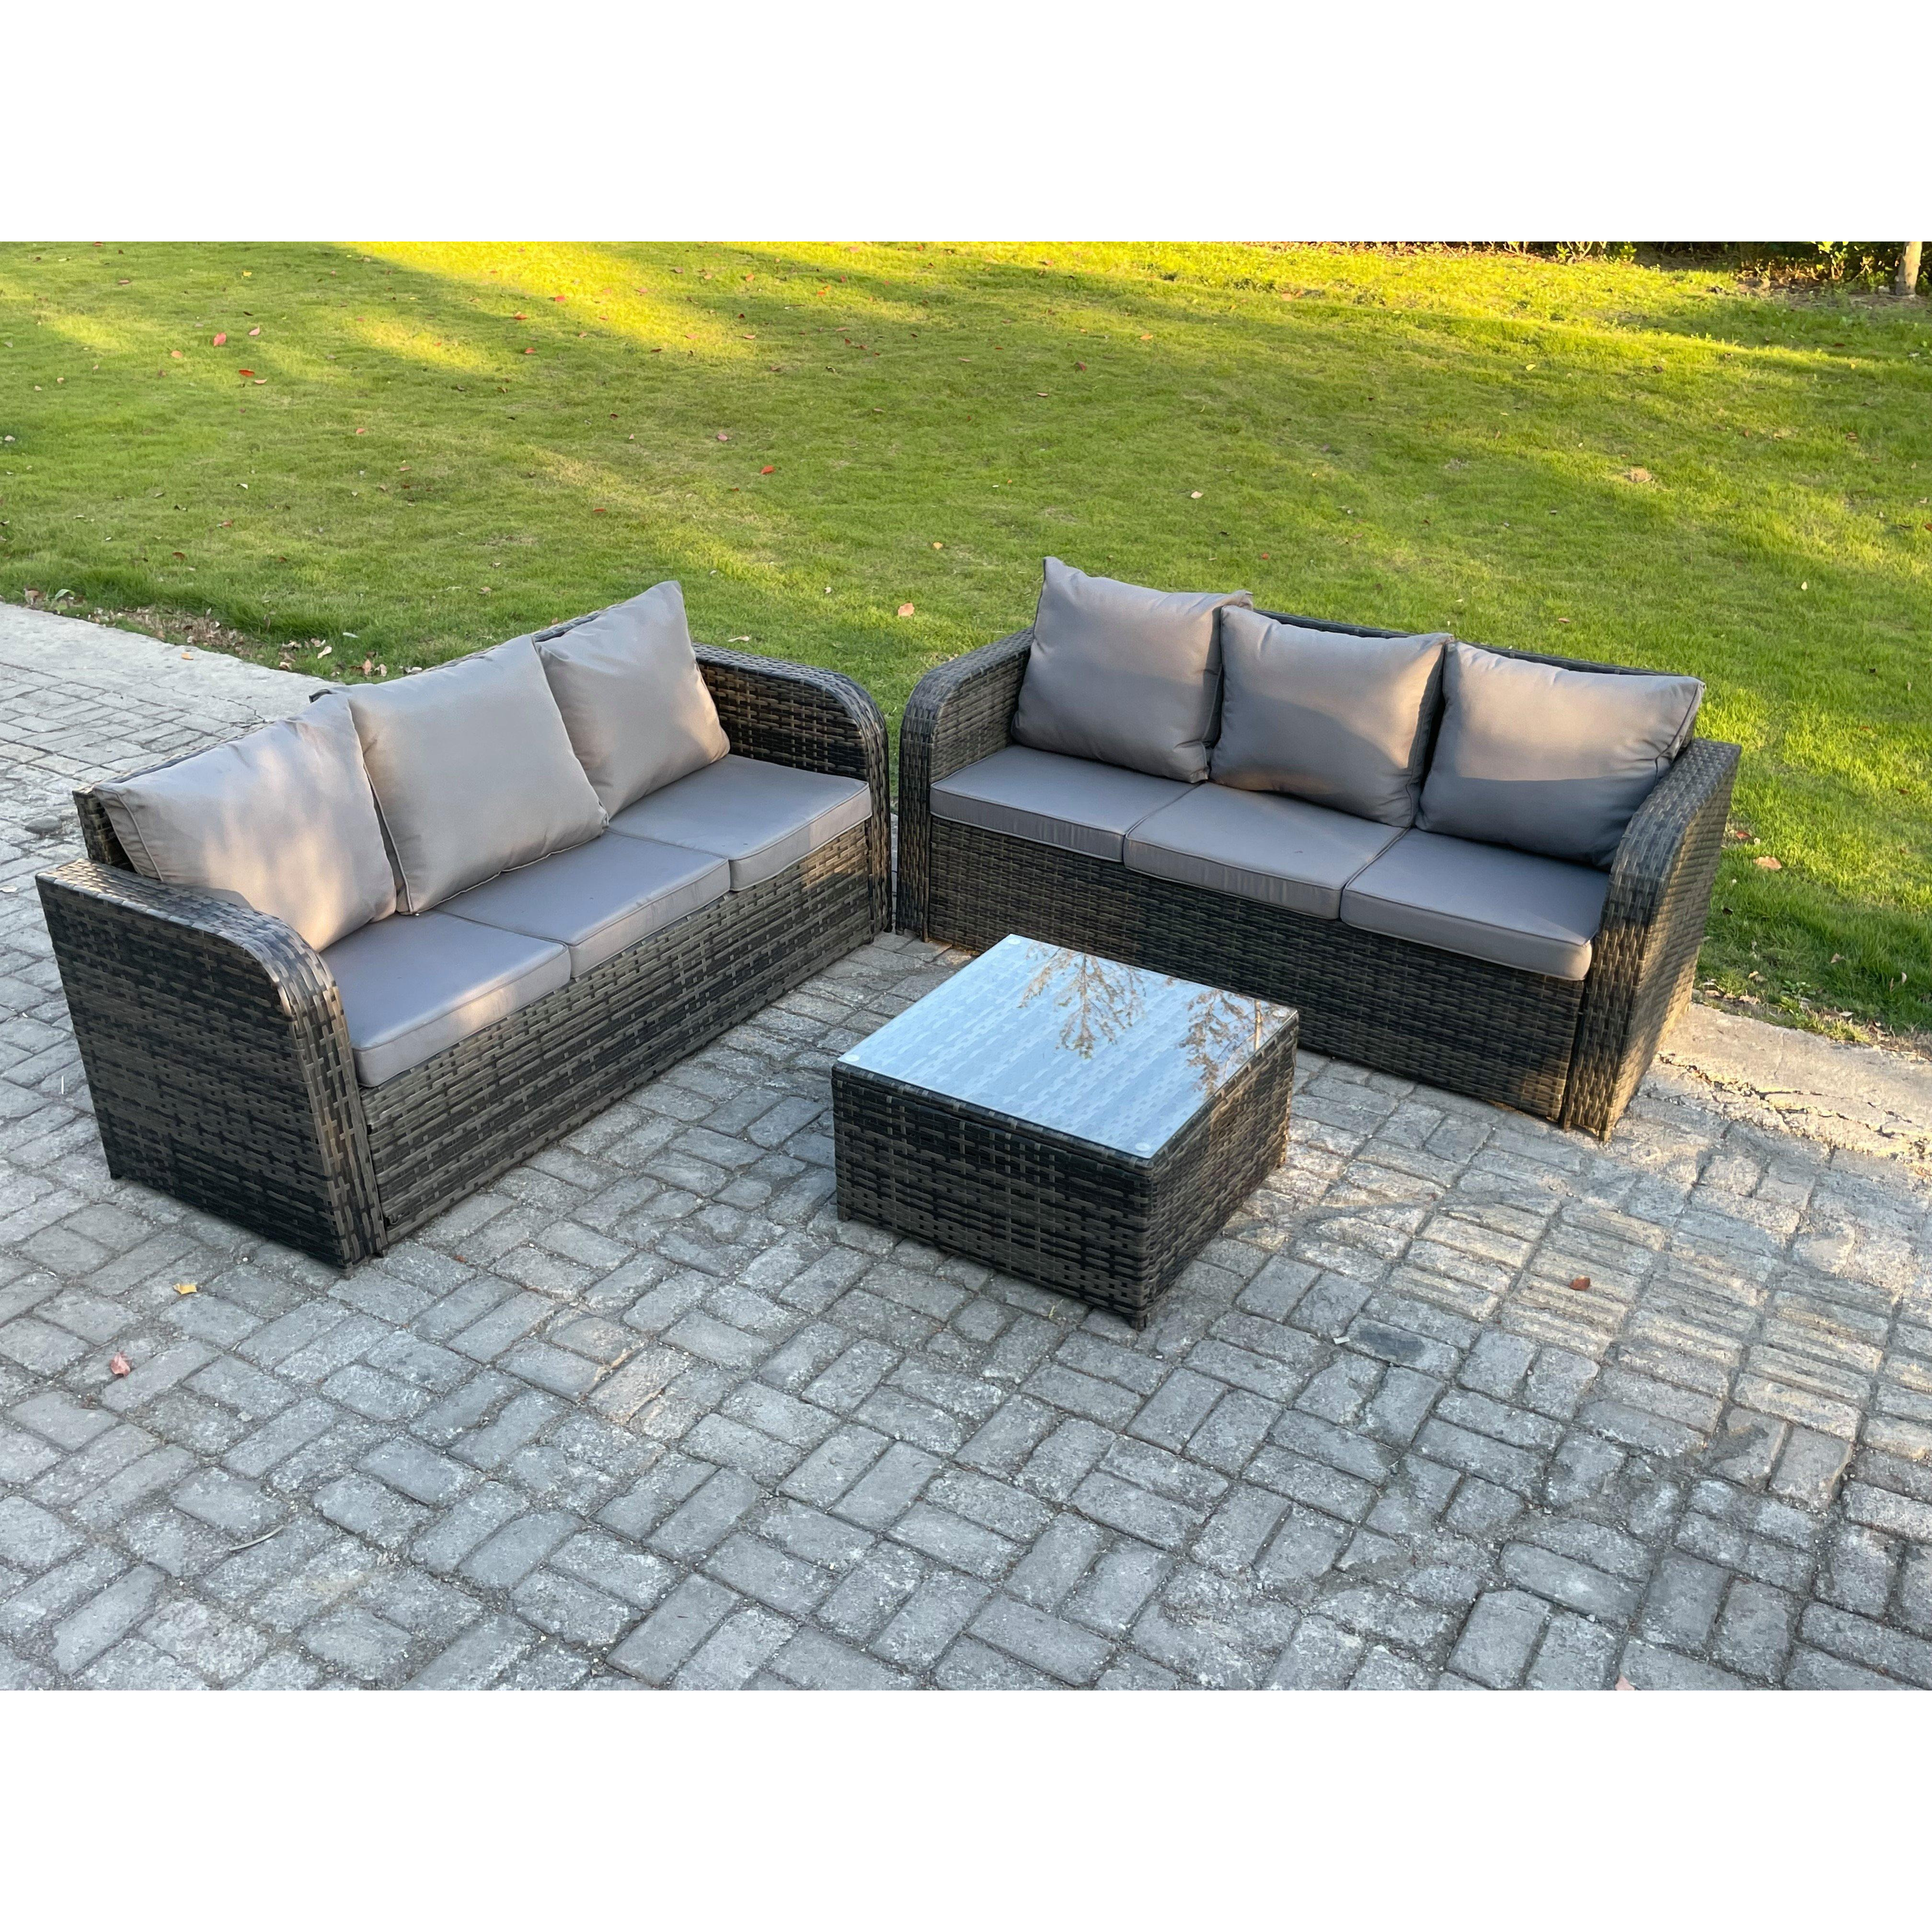 Indoor Outdoor Rattan Garden Furniture 6 Seater Set Table Sofa Chair Patio Conservatory with Grey Cushions - image 1